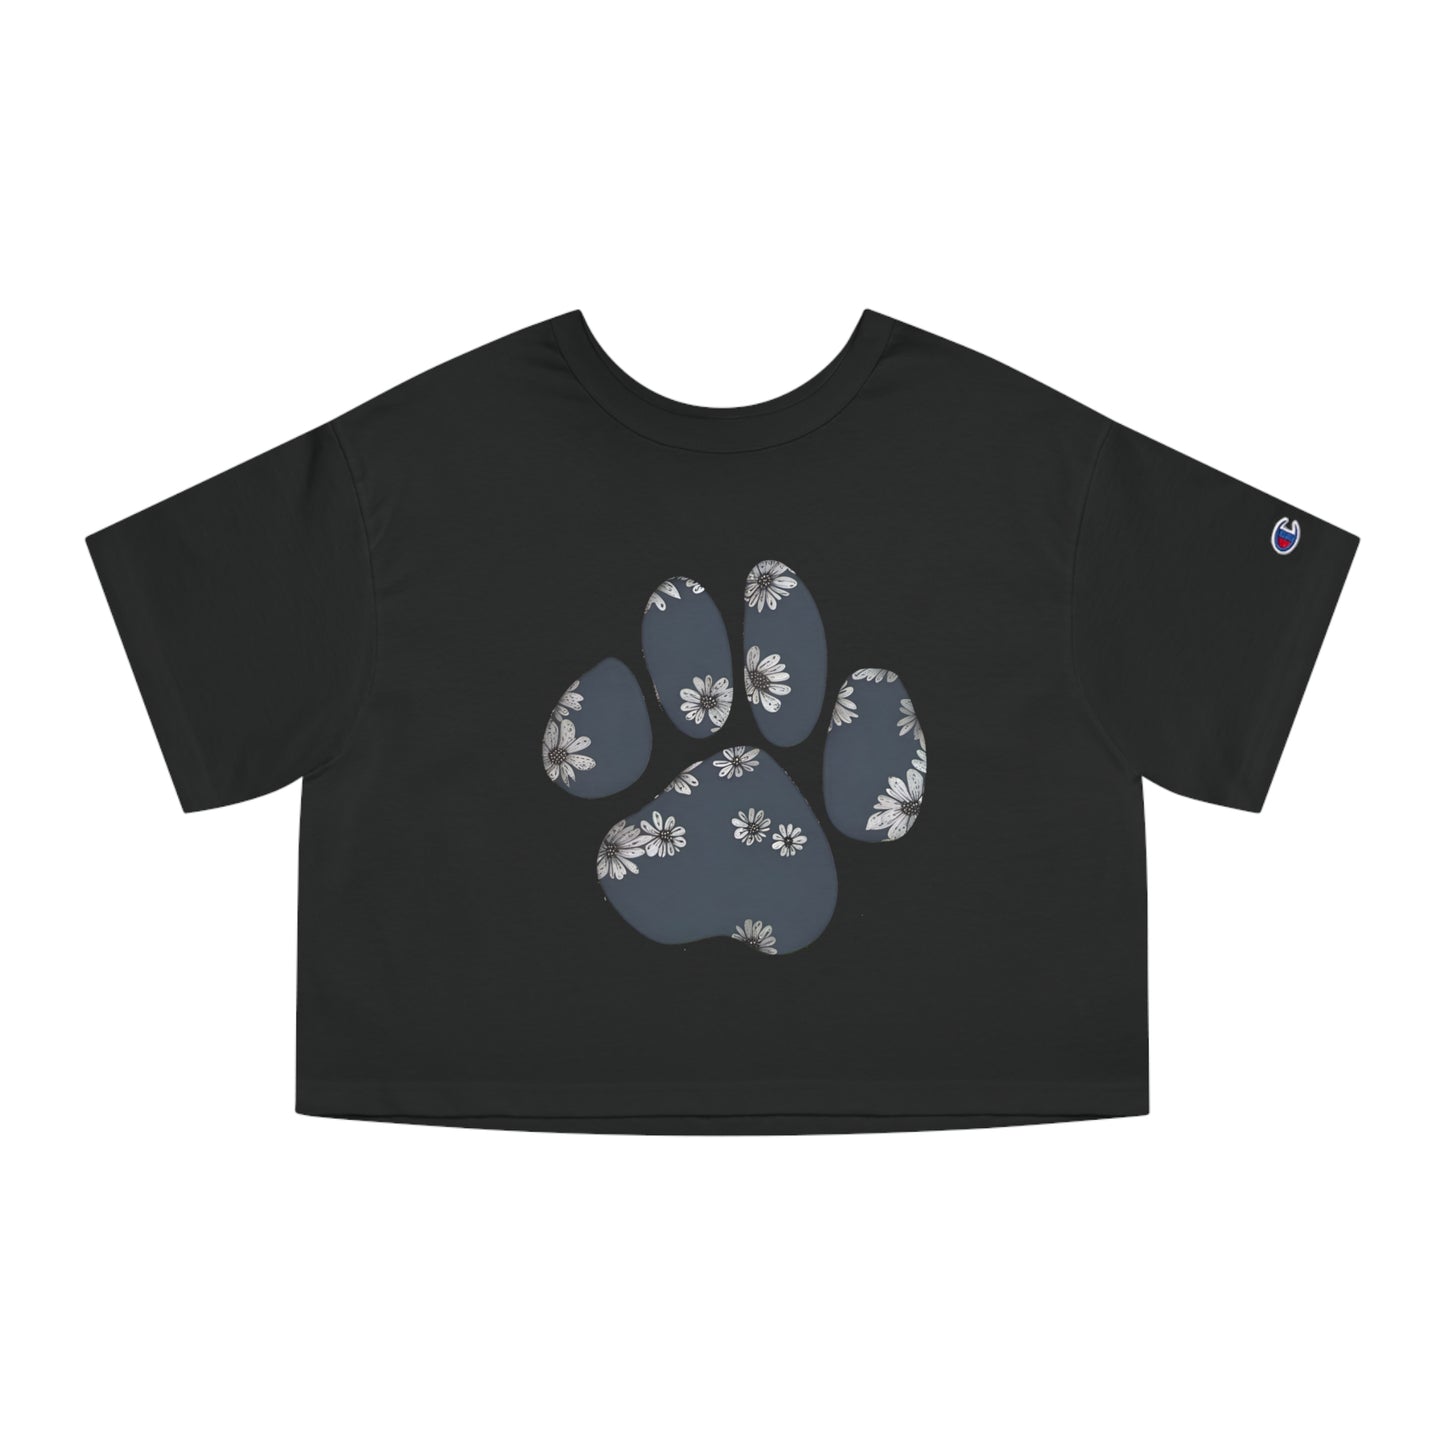 Champion Paw Print Cropped T-Shirt for Women - Trendy Athletic Wear